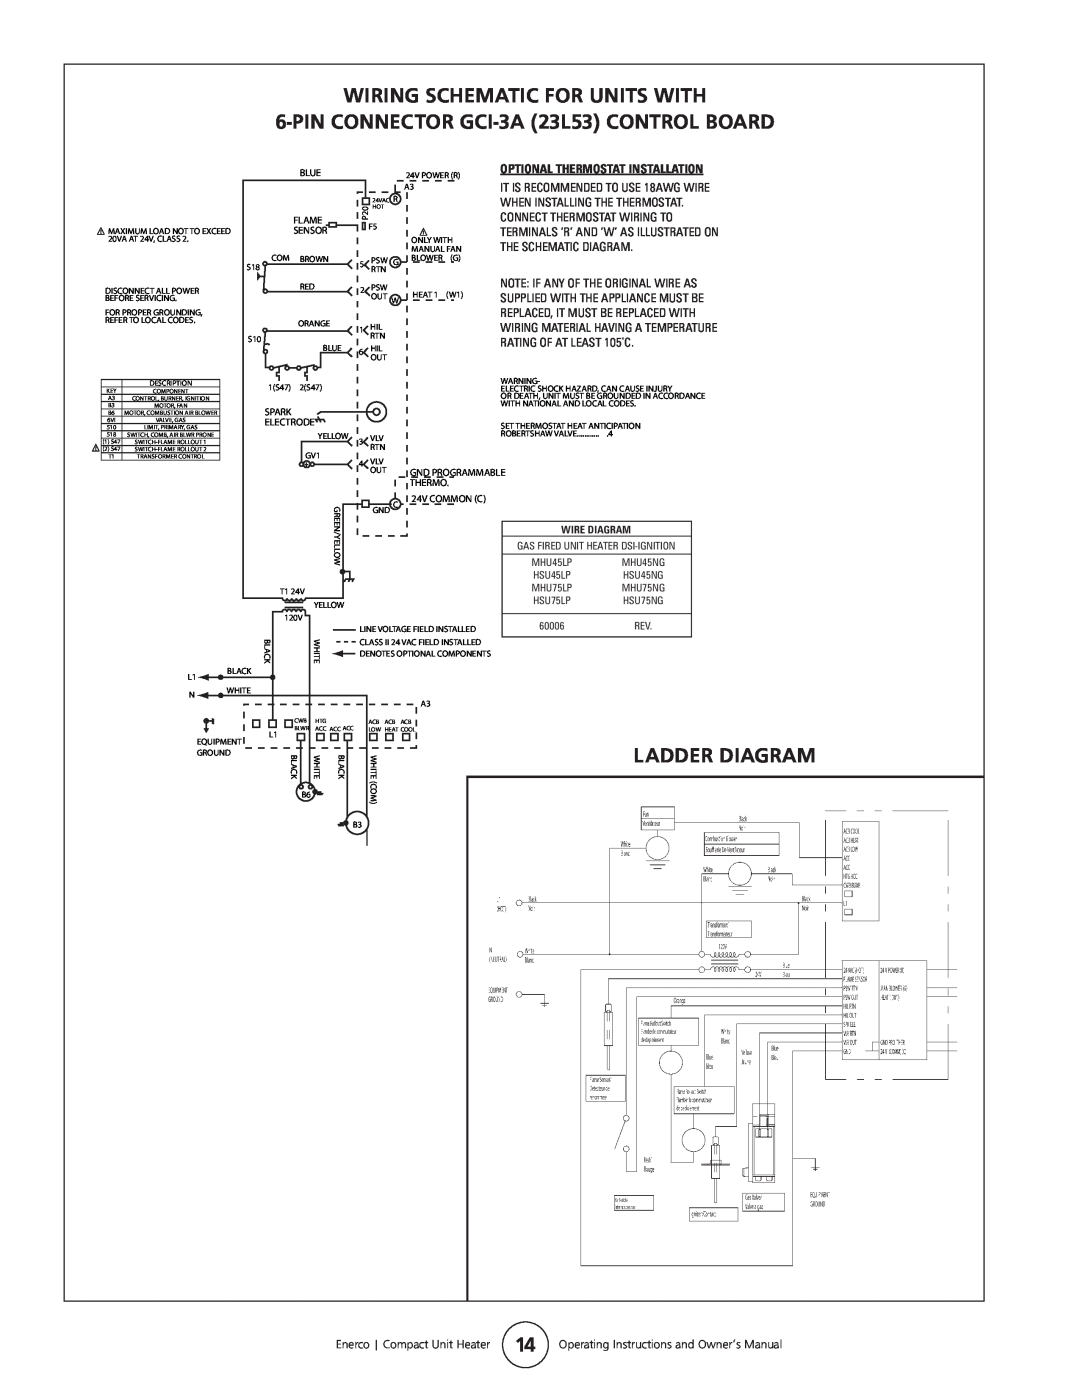 Enerco HSU 75 Wiring Schematic For Units With, PINCONNECTOR GCI-3A23L53 CONTROL BOARD, Ladder Diagram, Blue Flame, Spark 